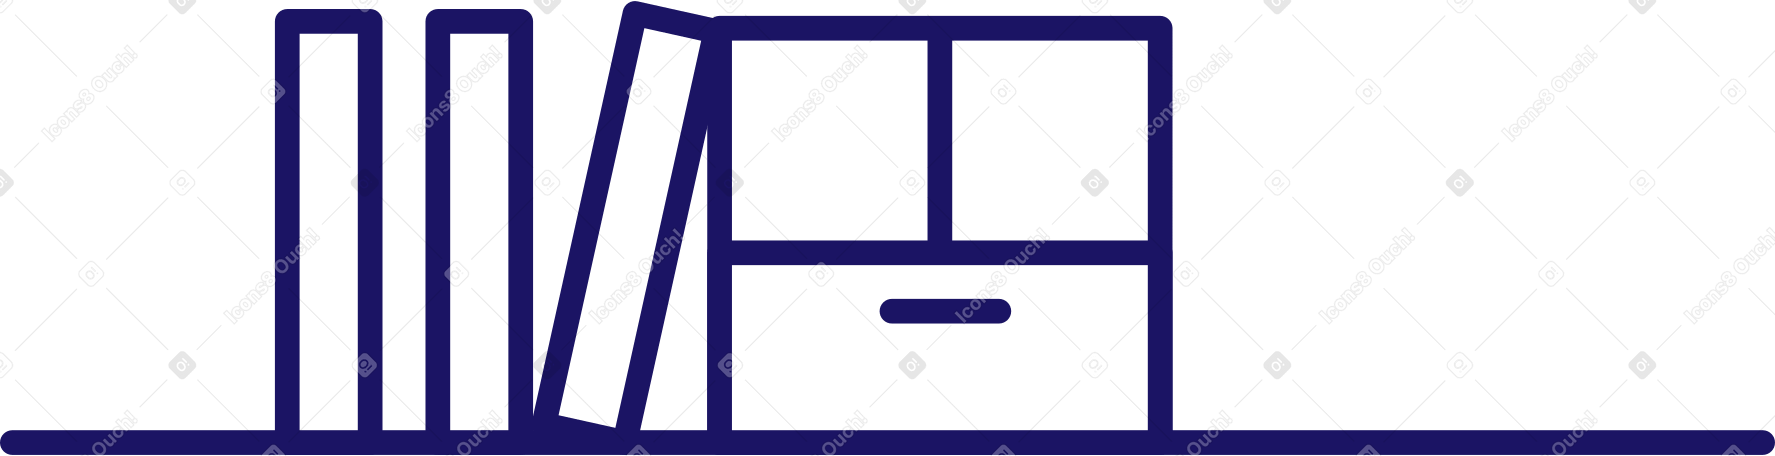 shelf with books and documents Illustration in PNG, SVG